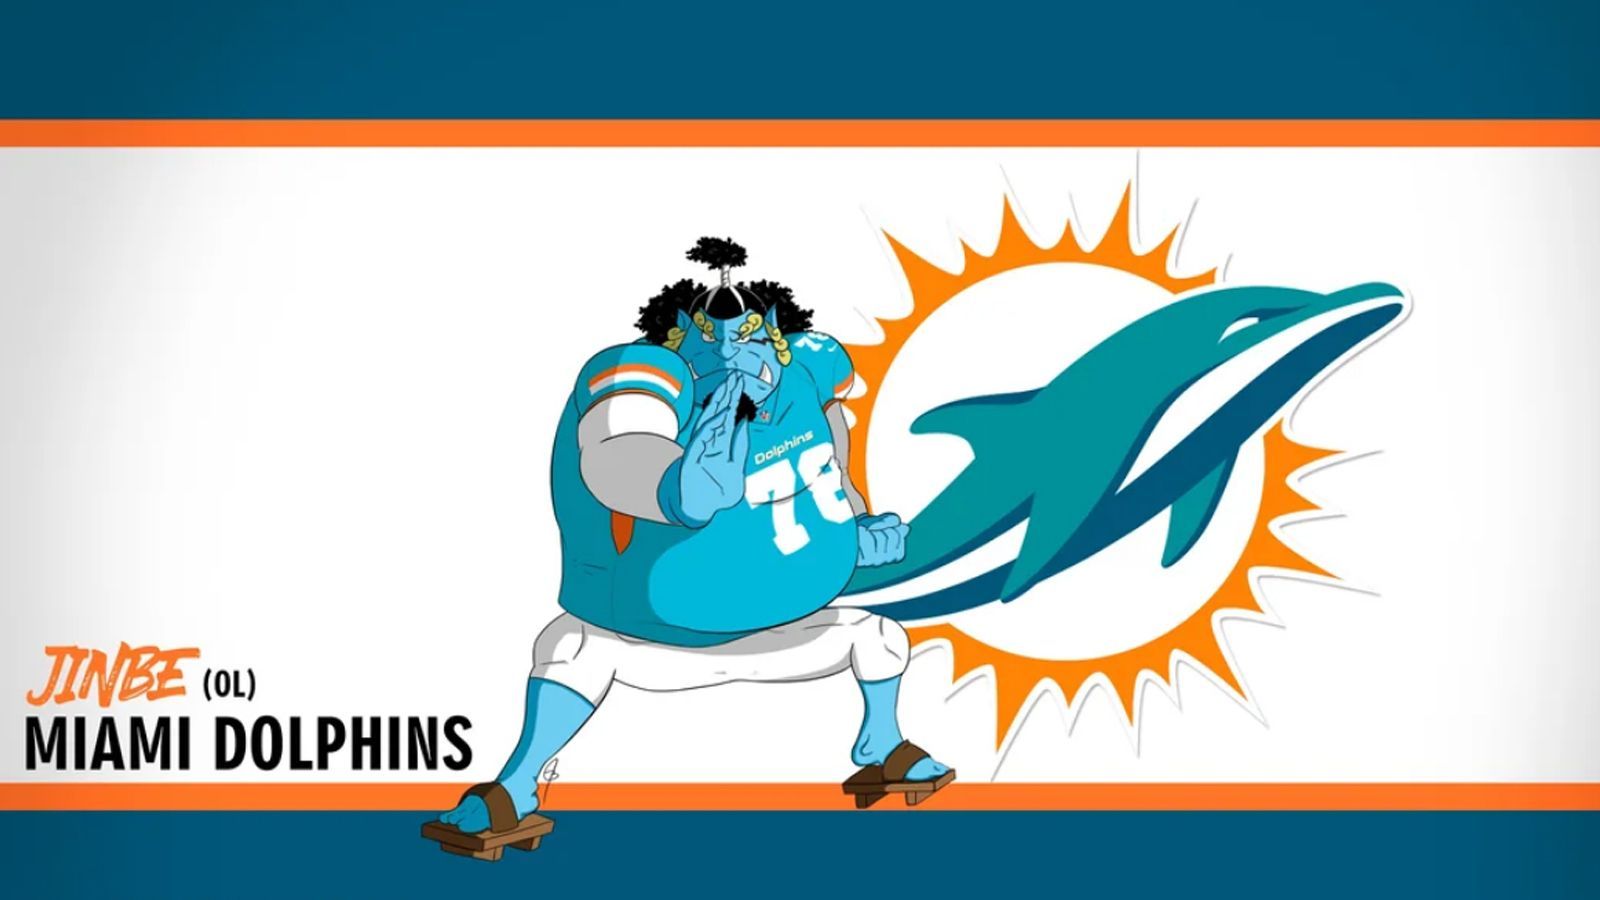 <strong>Jinbe (Miami Dolphins)</strong>